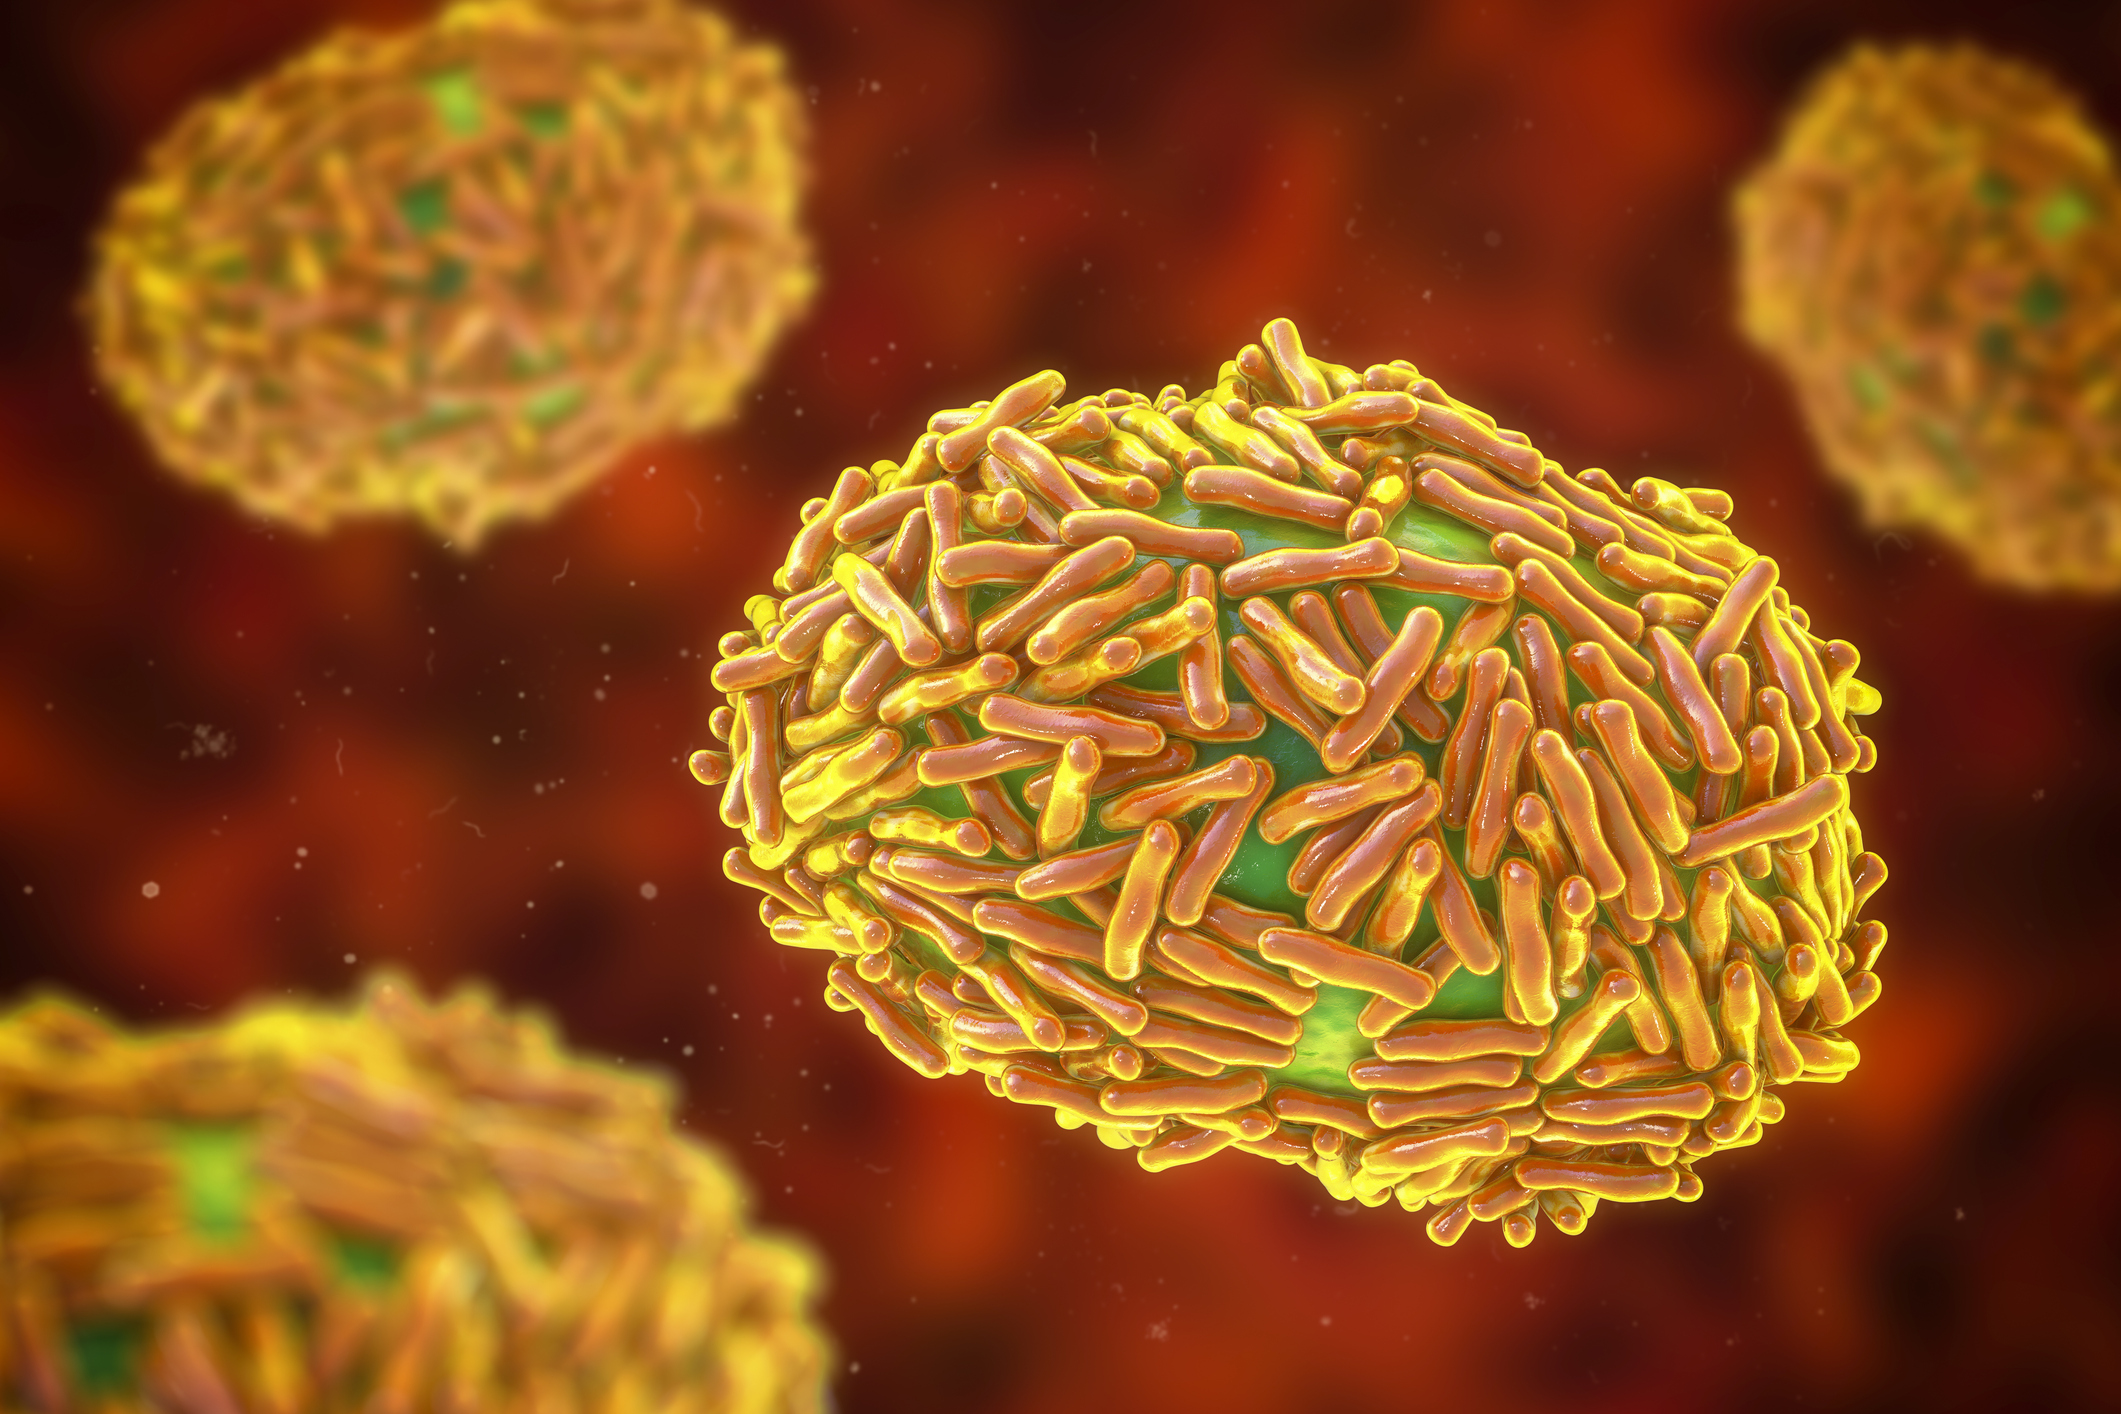 3D illustration of monkeypox virus with red, yellow and green colors